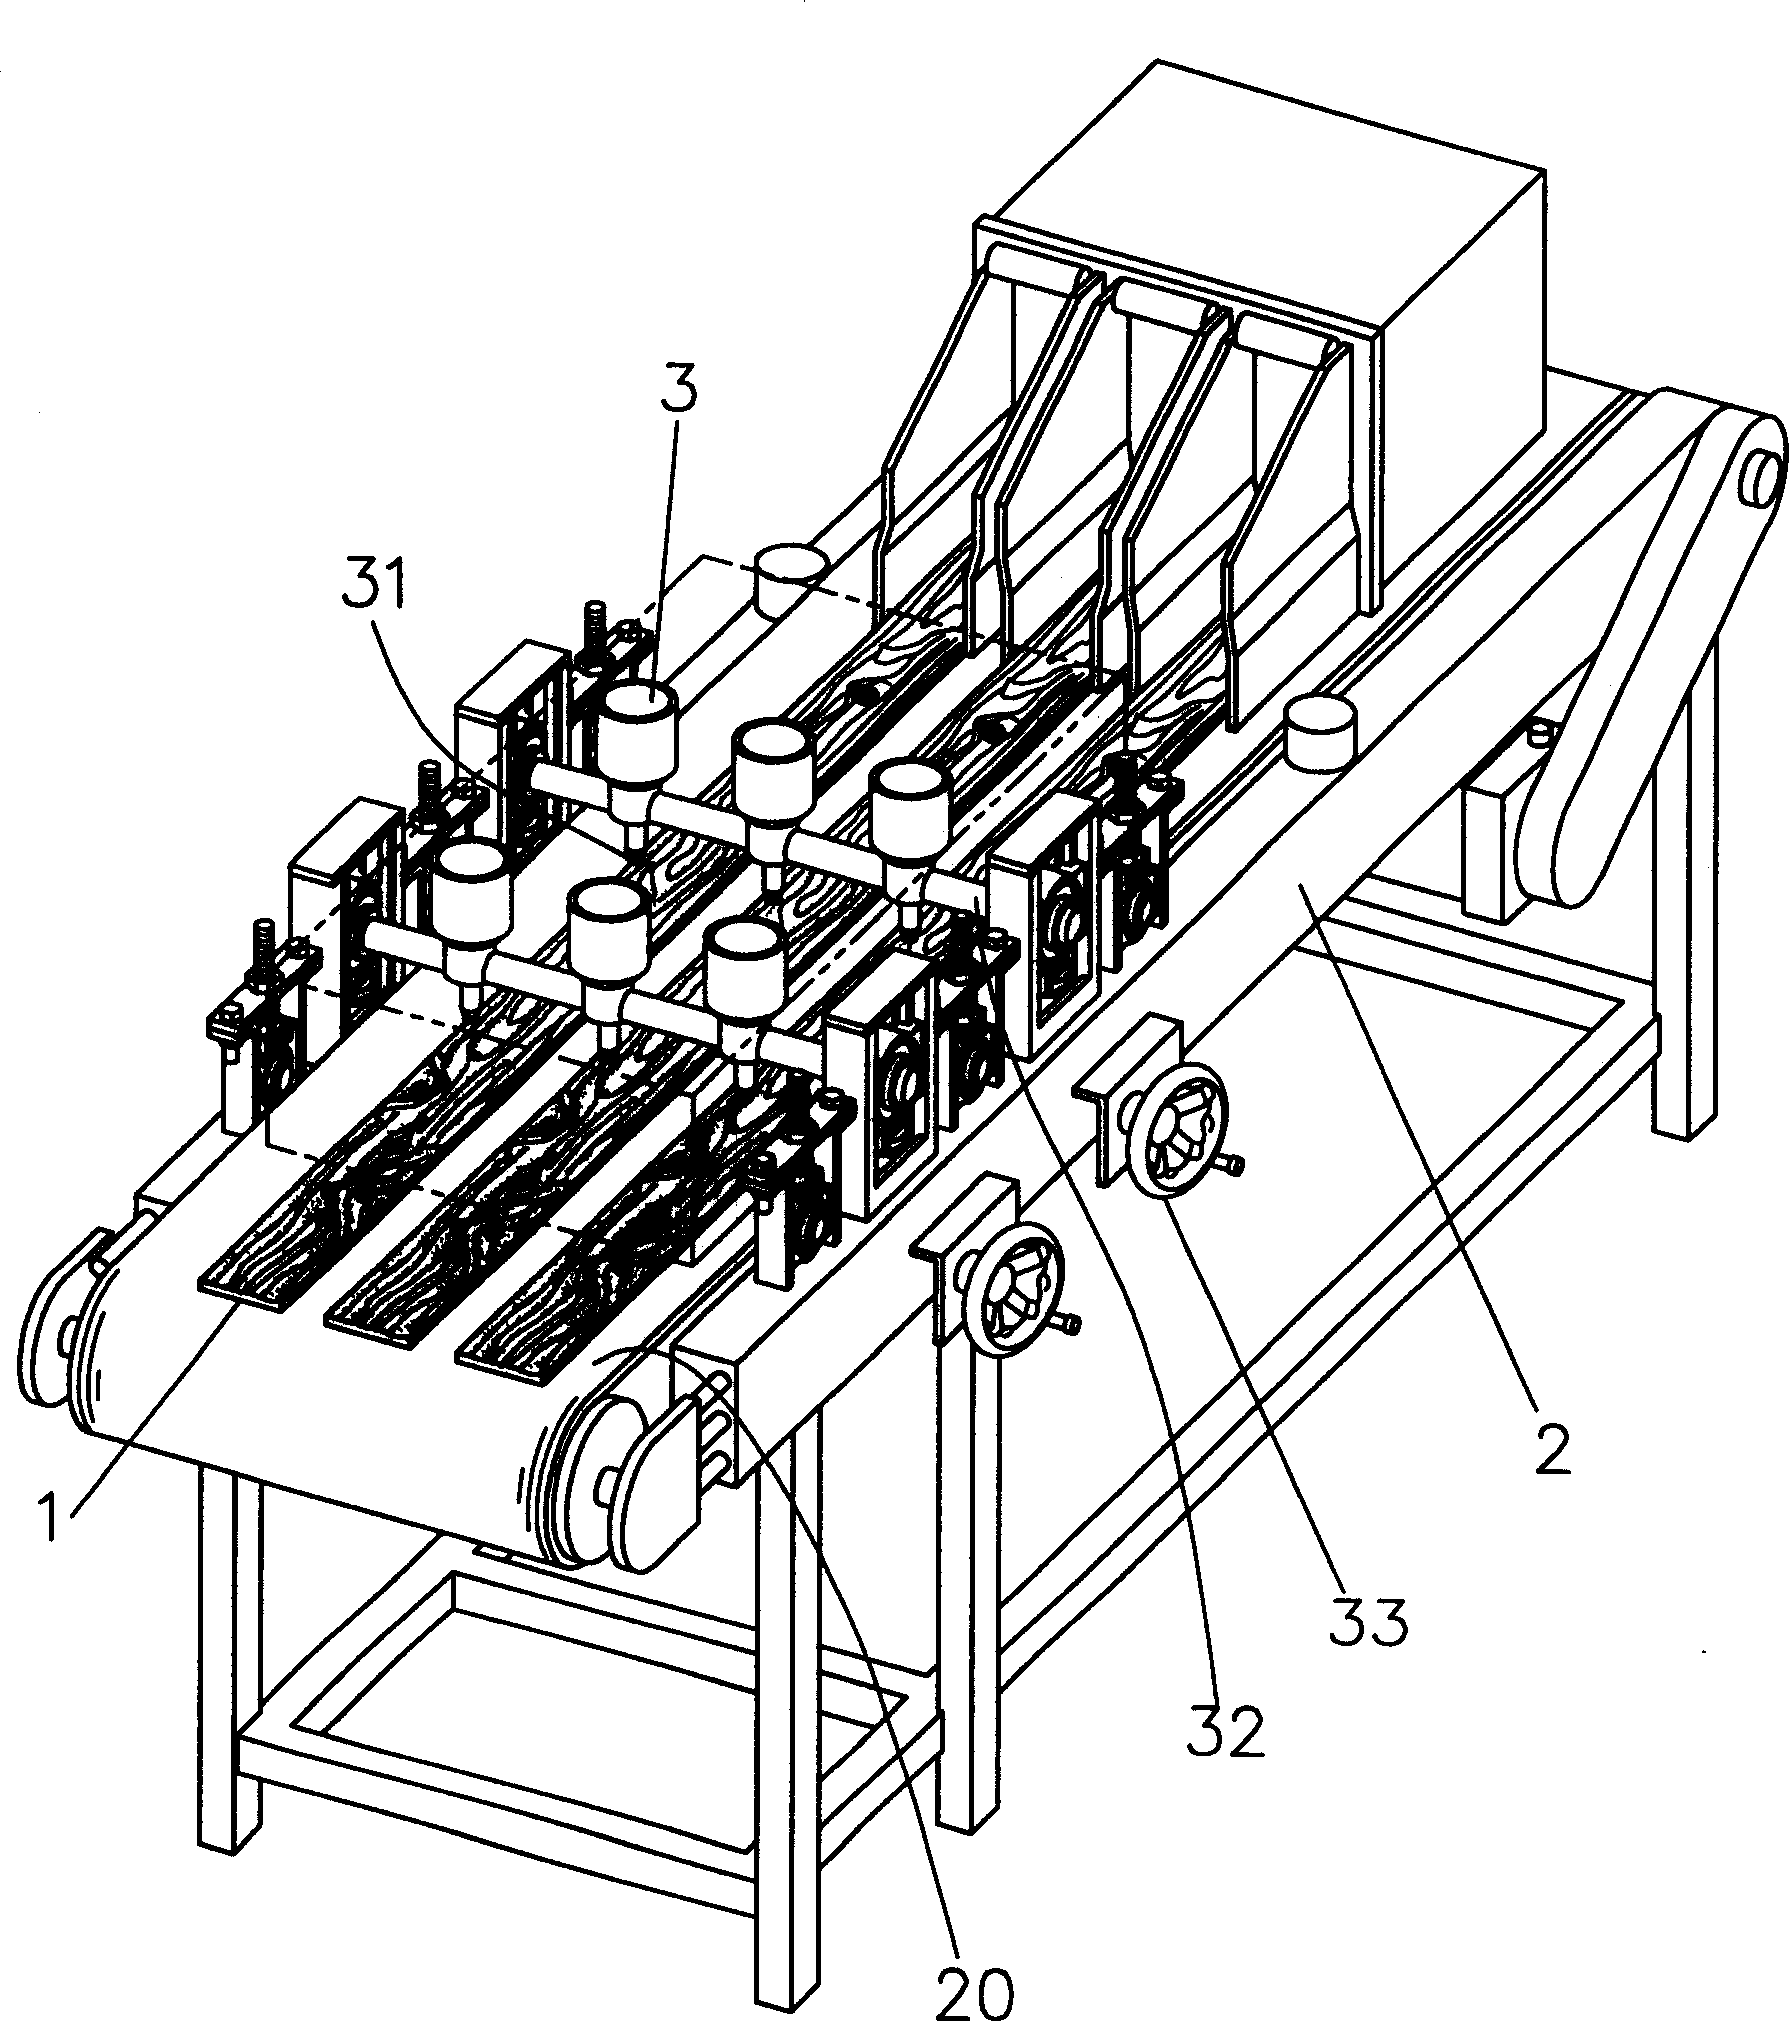 Method and equipment for forming wood pattern by sand blasting